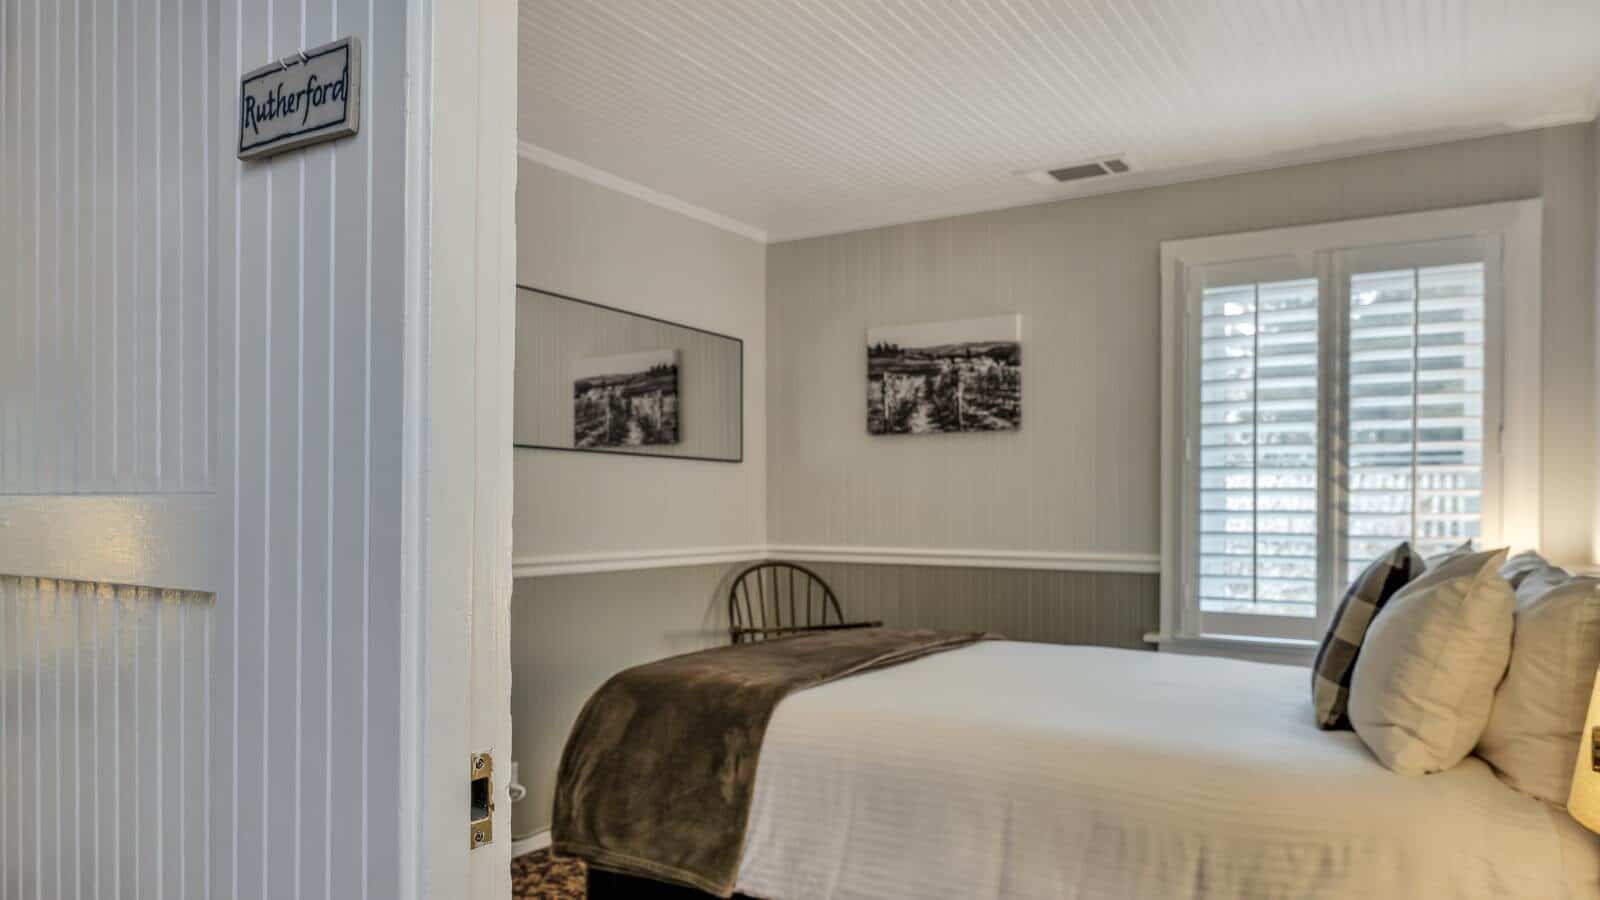 View into bedroom with white walls, light gray wainscotting, floral carpeting, white bedding, and dark wooden chair